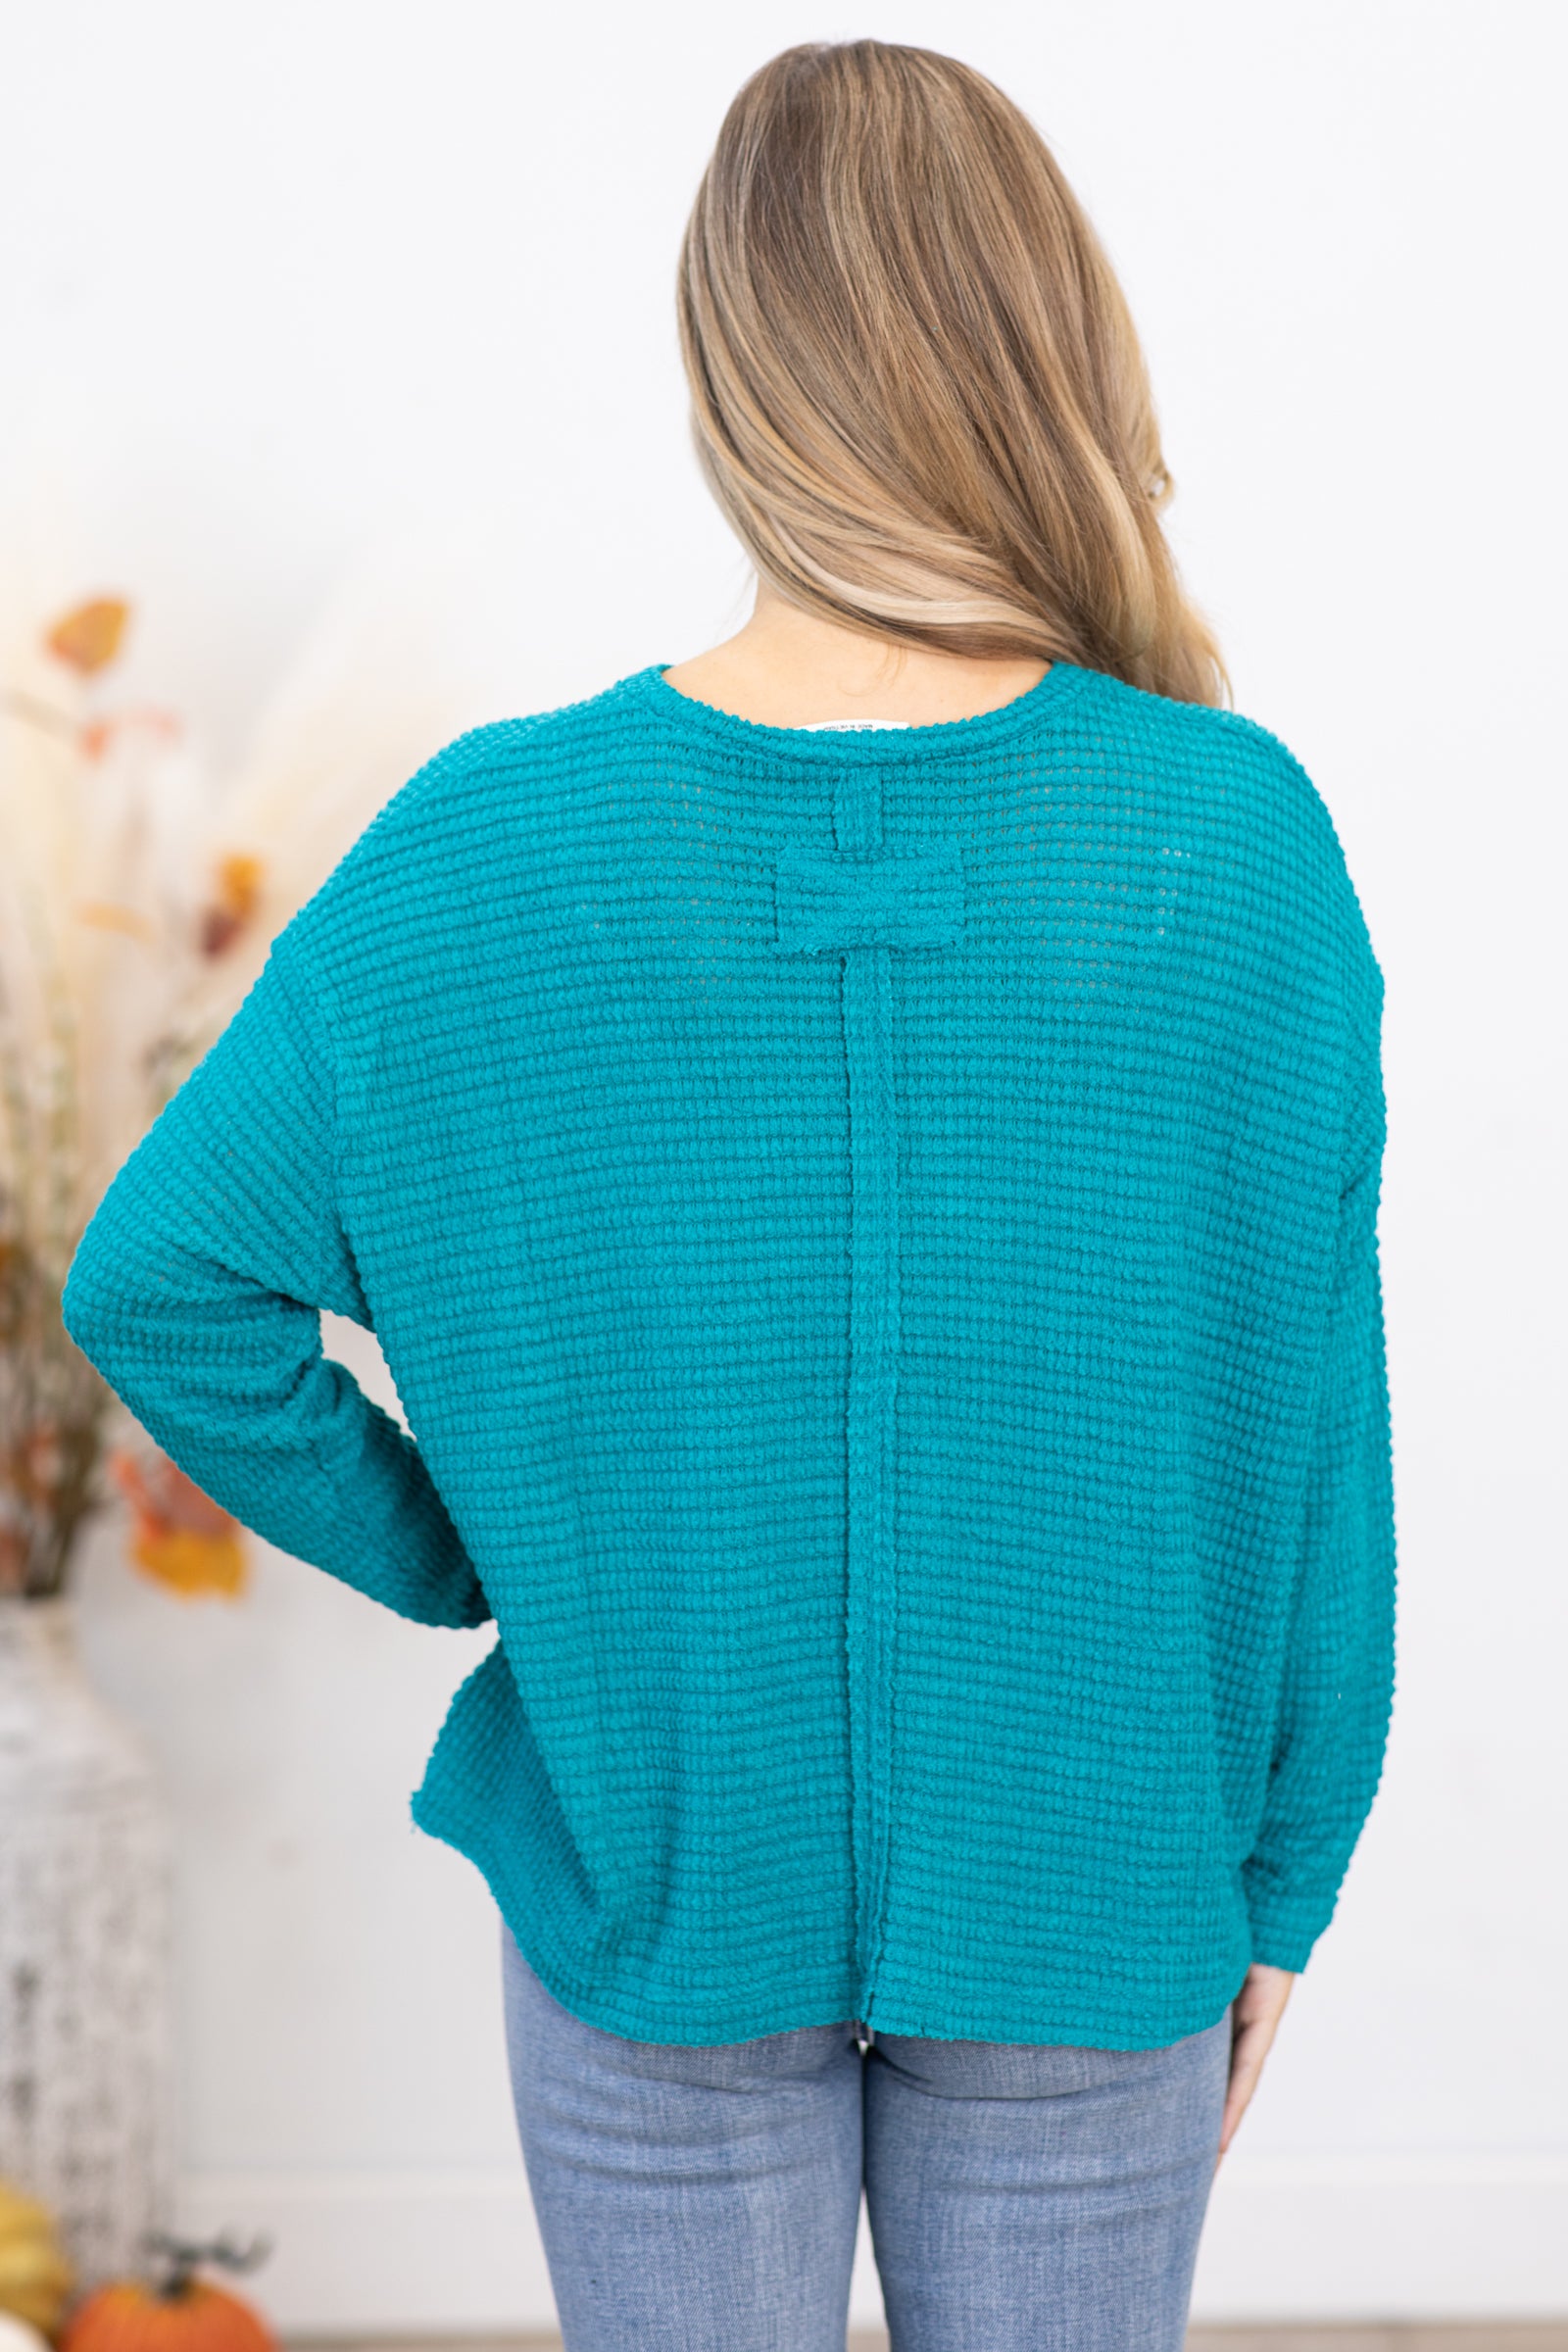 Teal Waffle Knit Sweater With Pocket